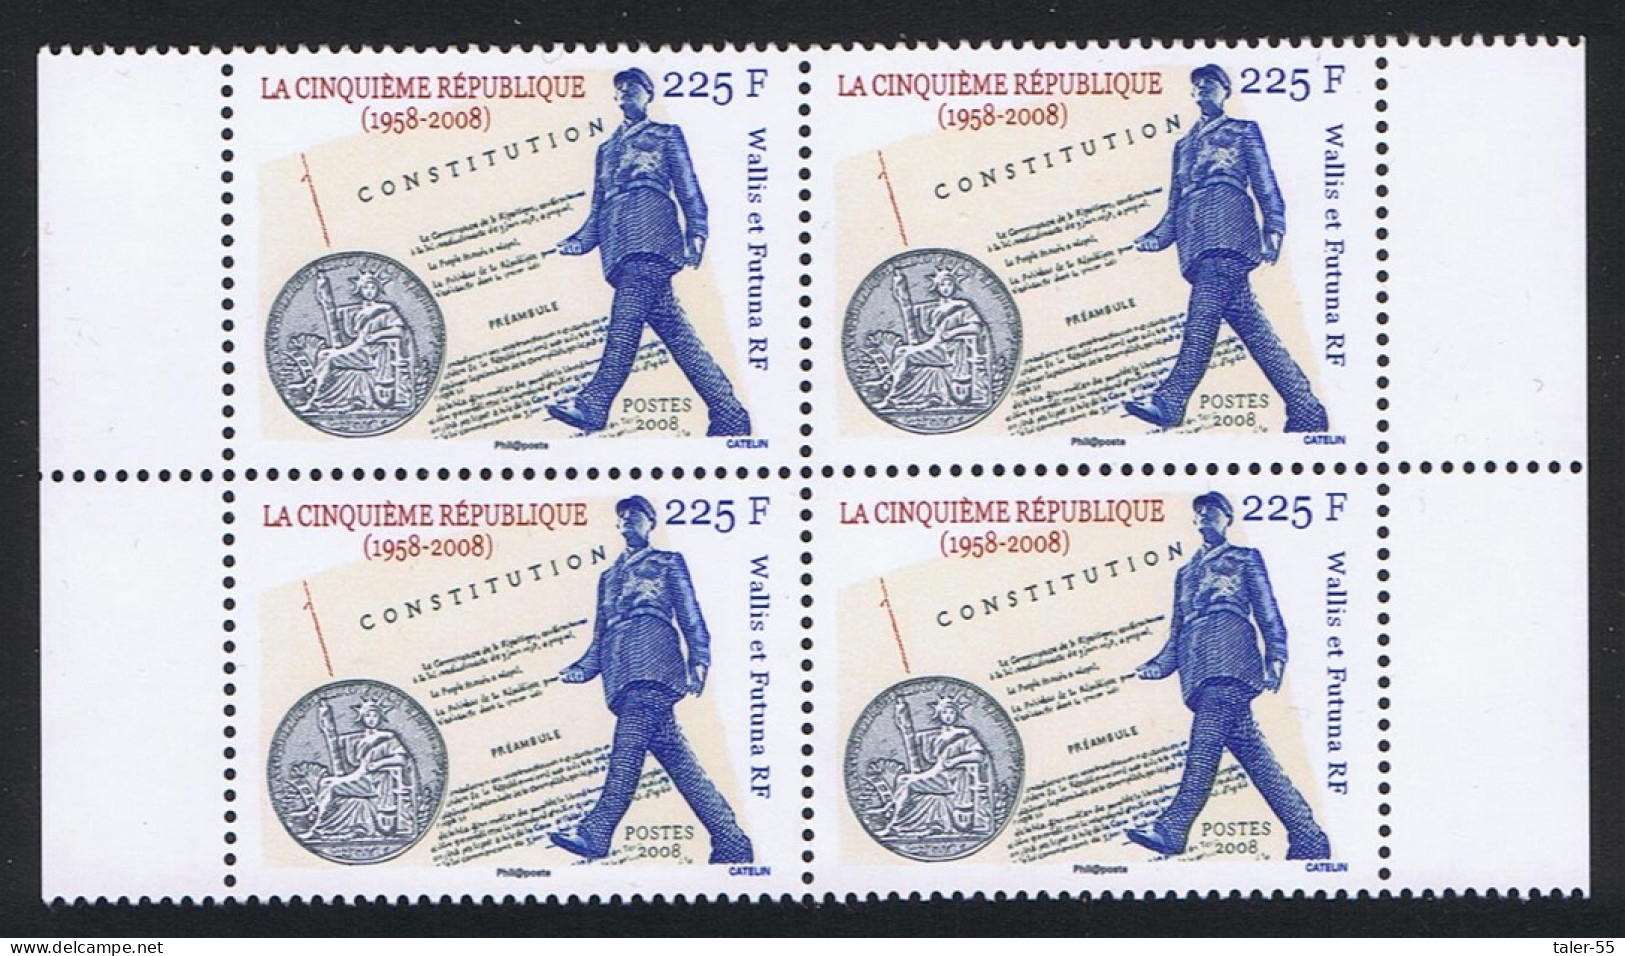 Wallis And Futuna General De Gaulle And Constitution Block Of 4 2008 MNH SG#951 - Neufs